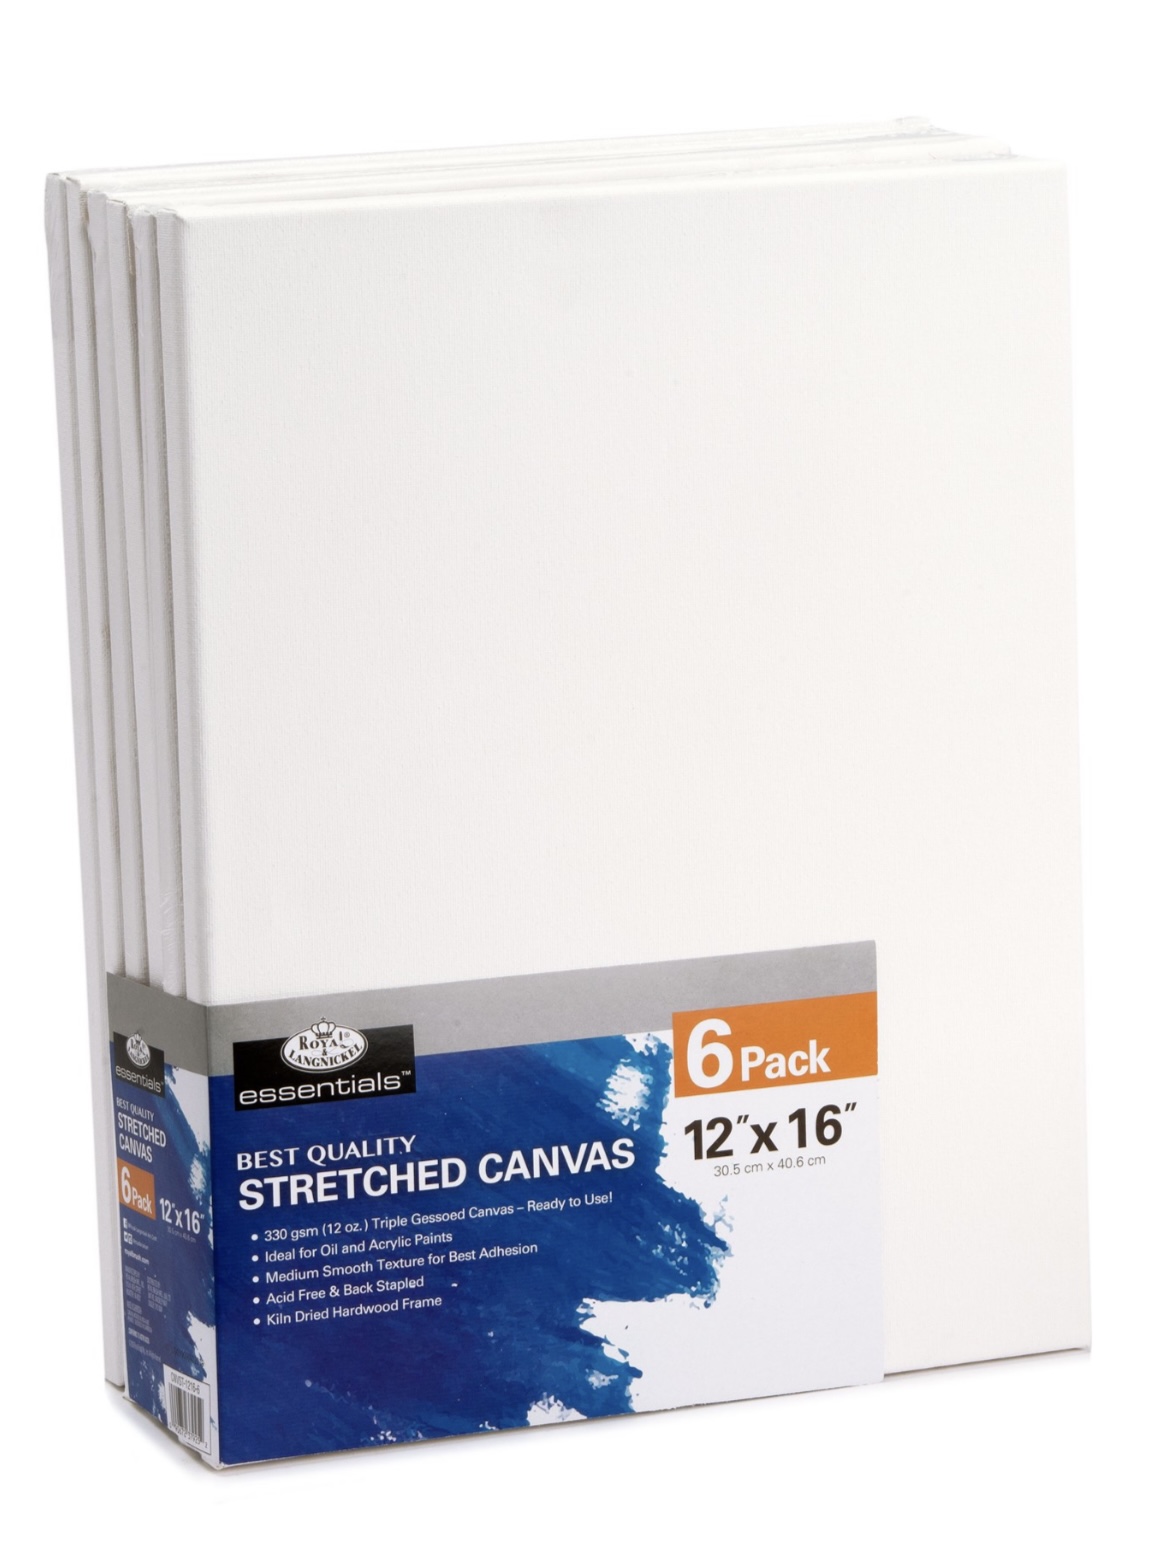 12x16 Stretched canvas 6 Pack Wal-Mart in store pickup $5